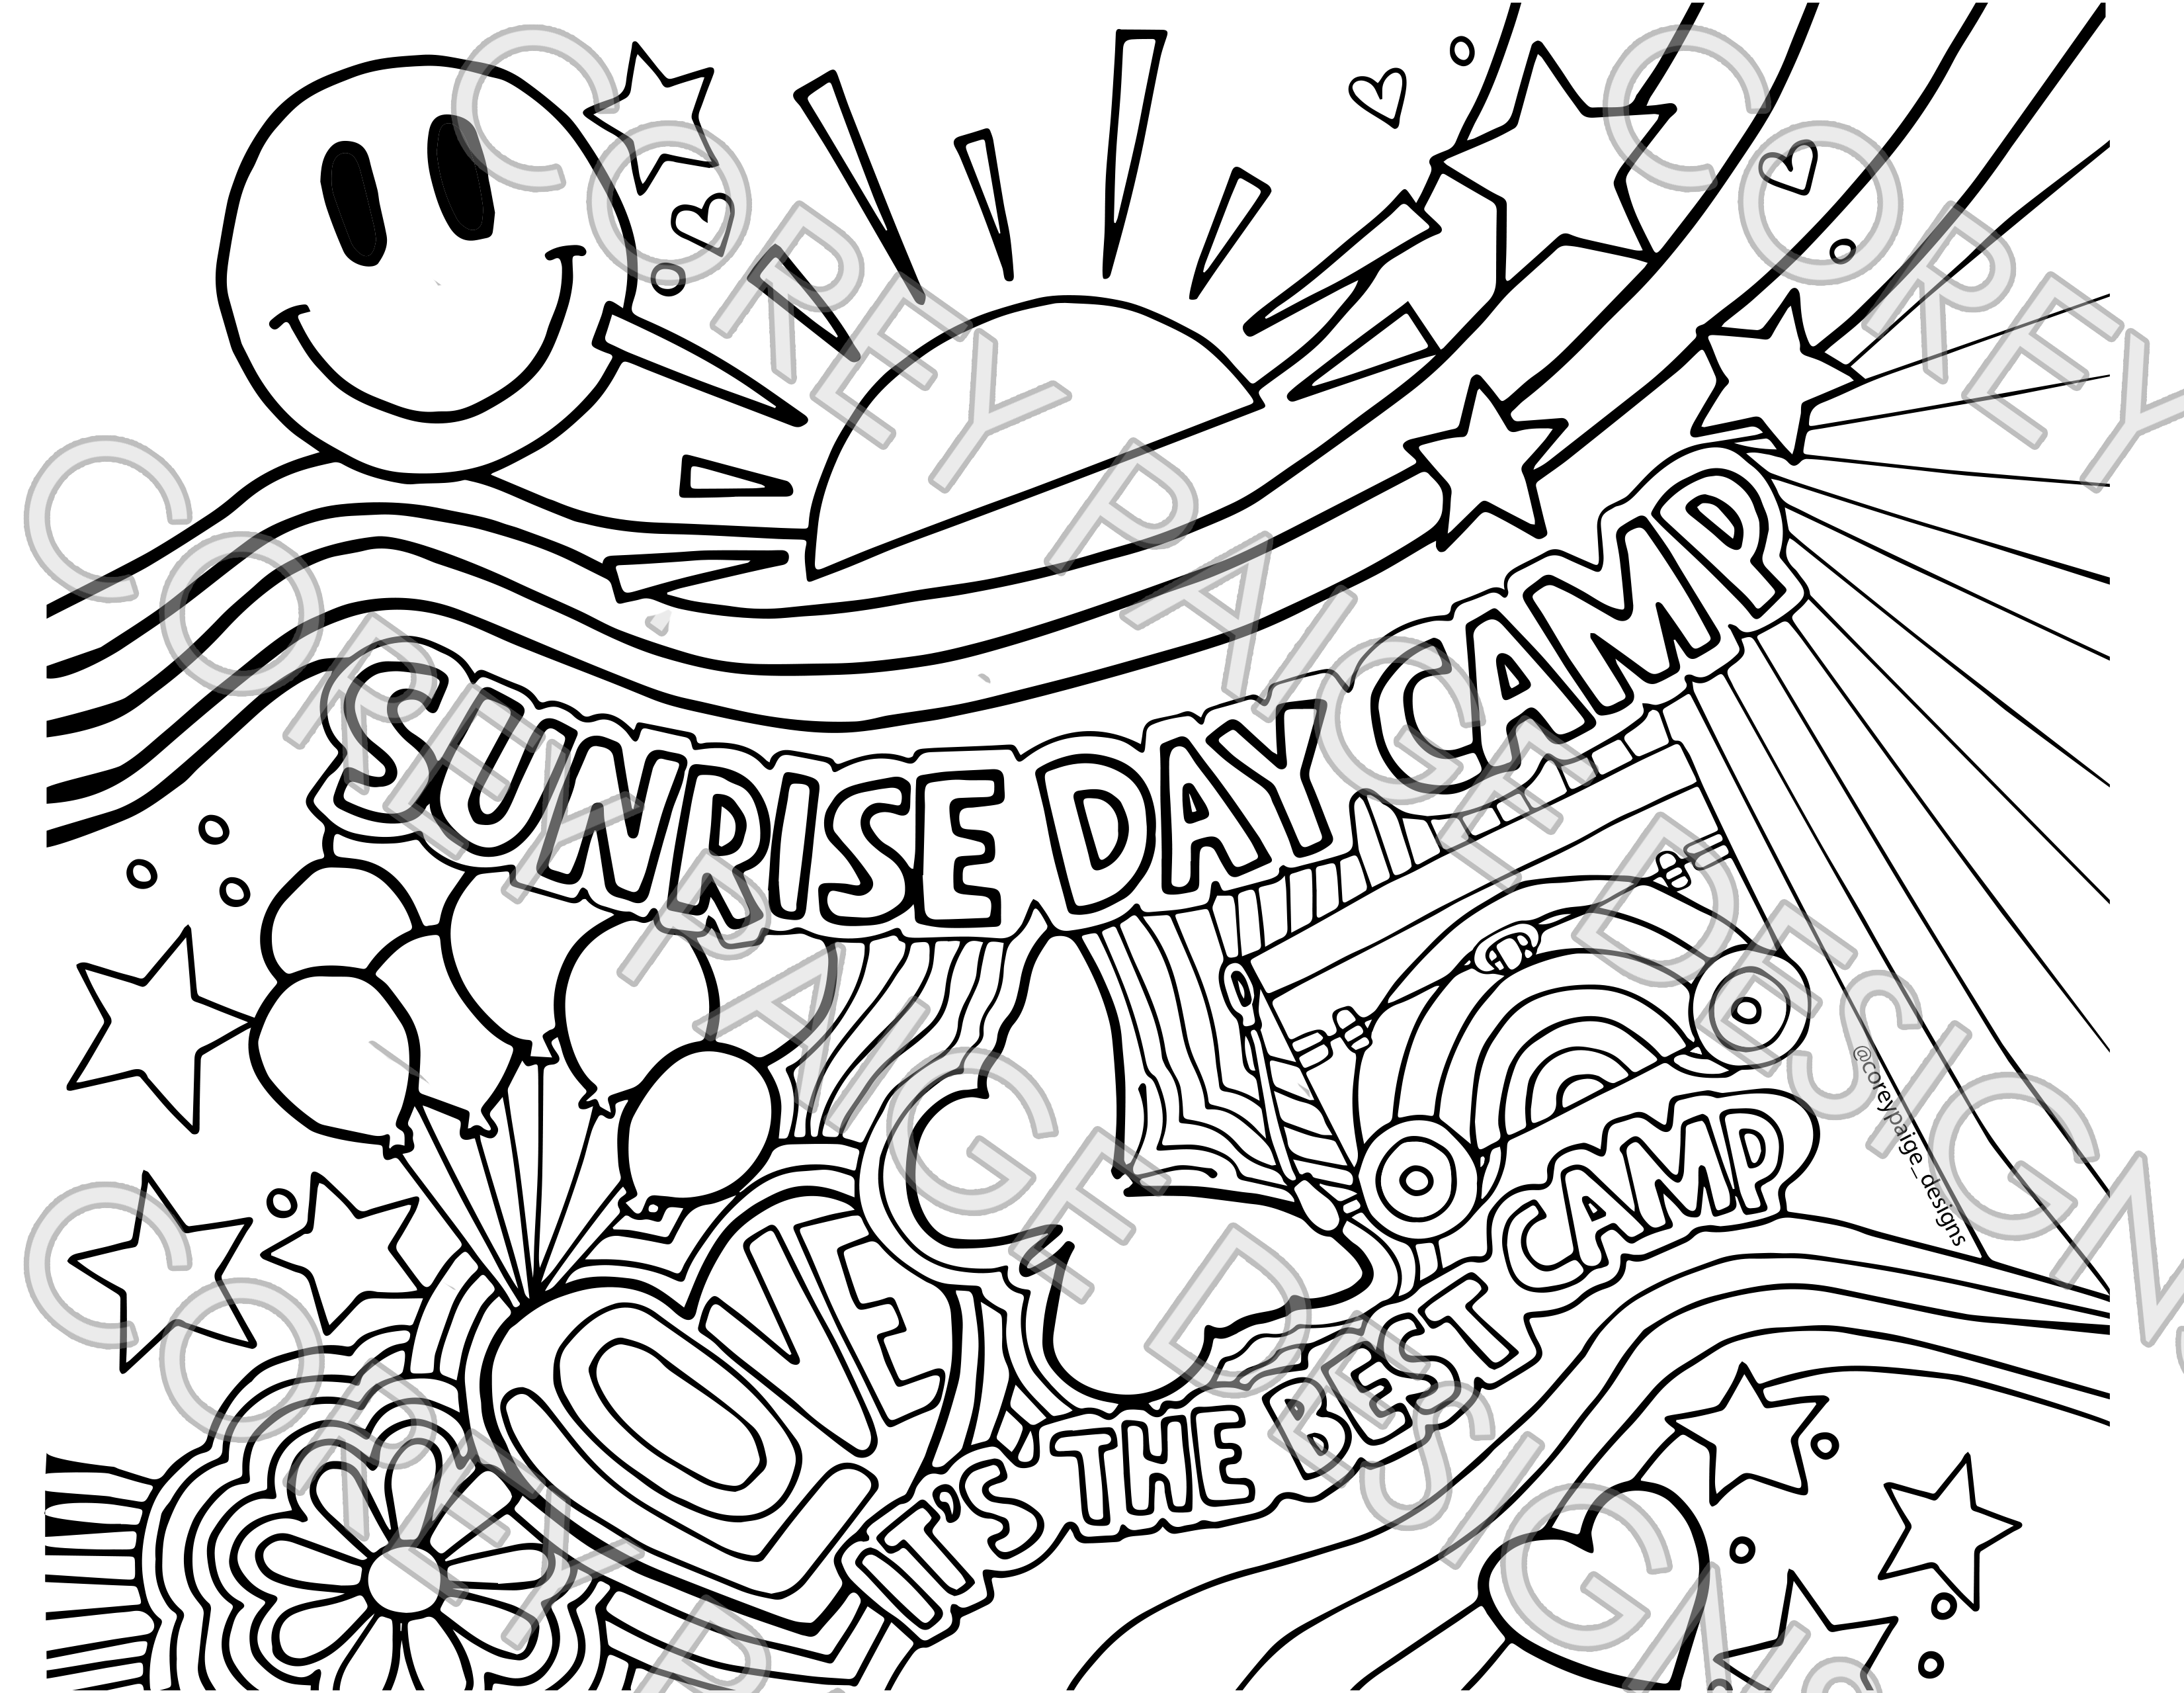 Sunrise Day Camp Coloring Sheet Pack